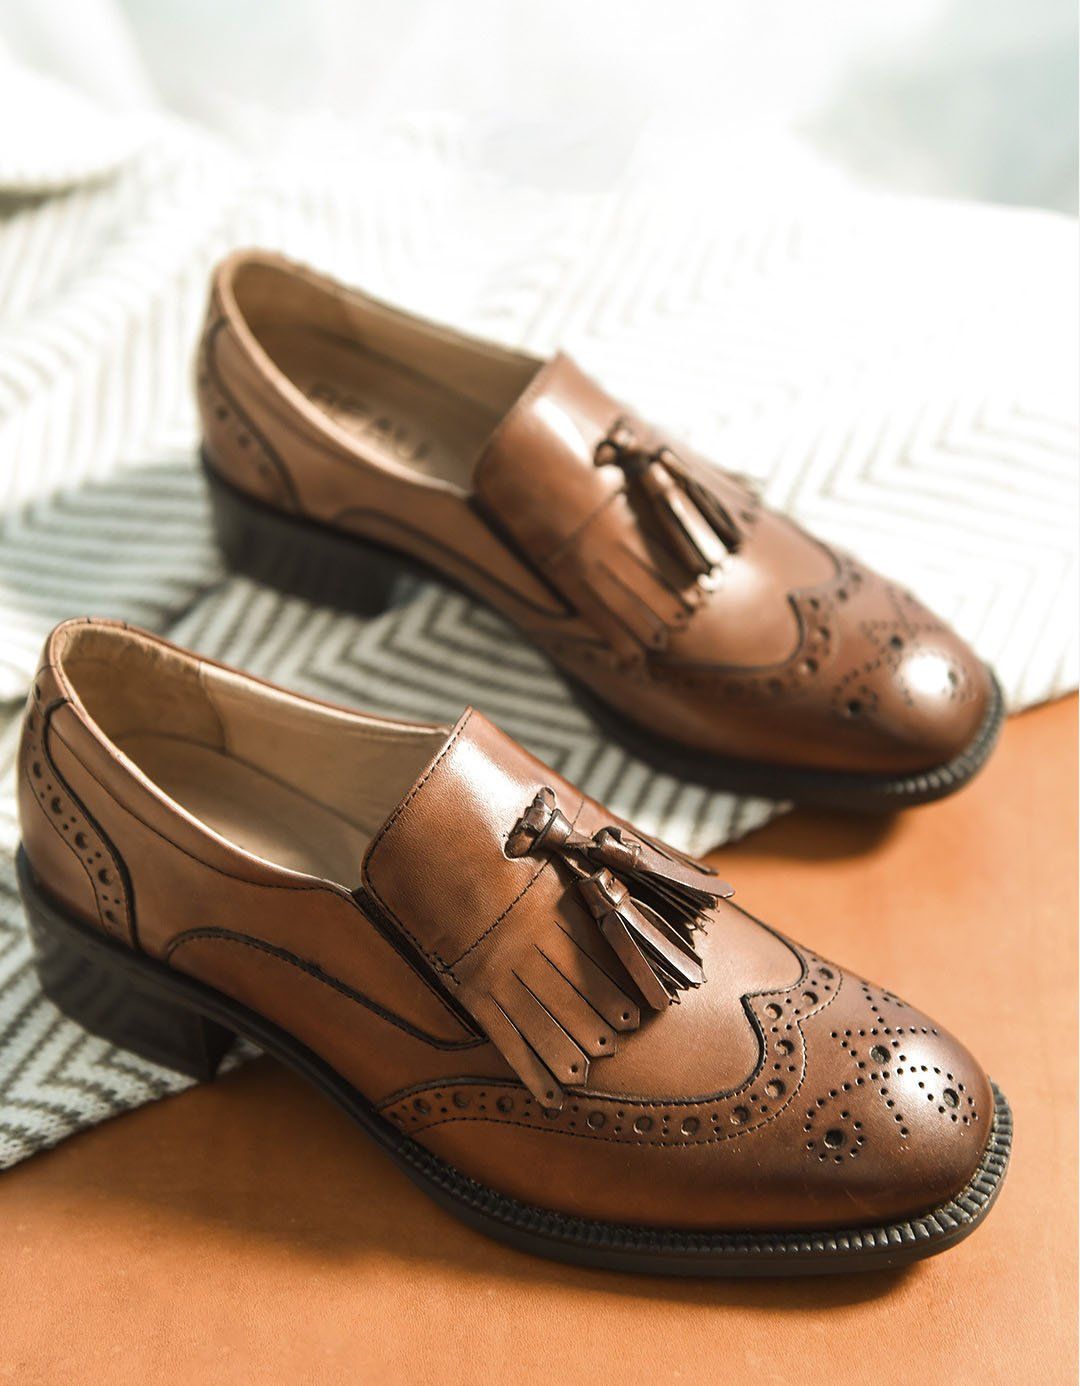 How to Wear Leather Loafers: Top 15 Stylish Outfit Ideas for Ladies